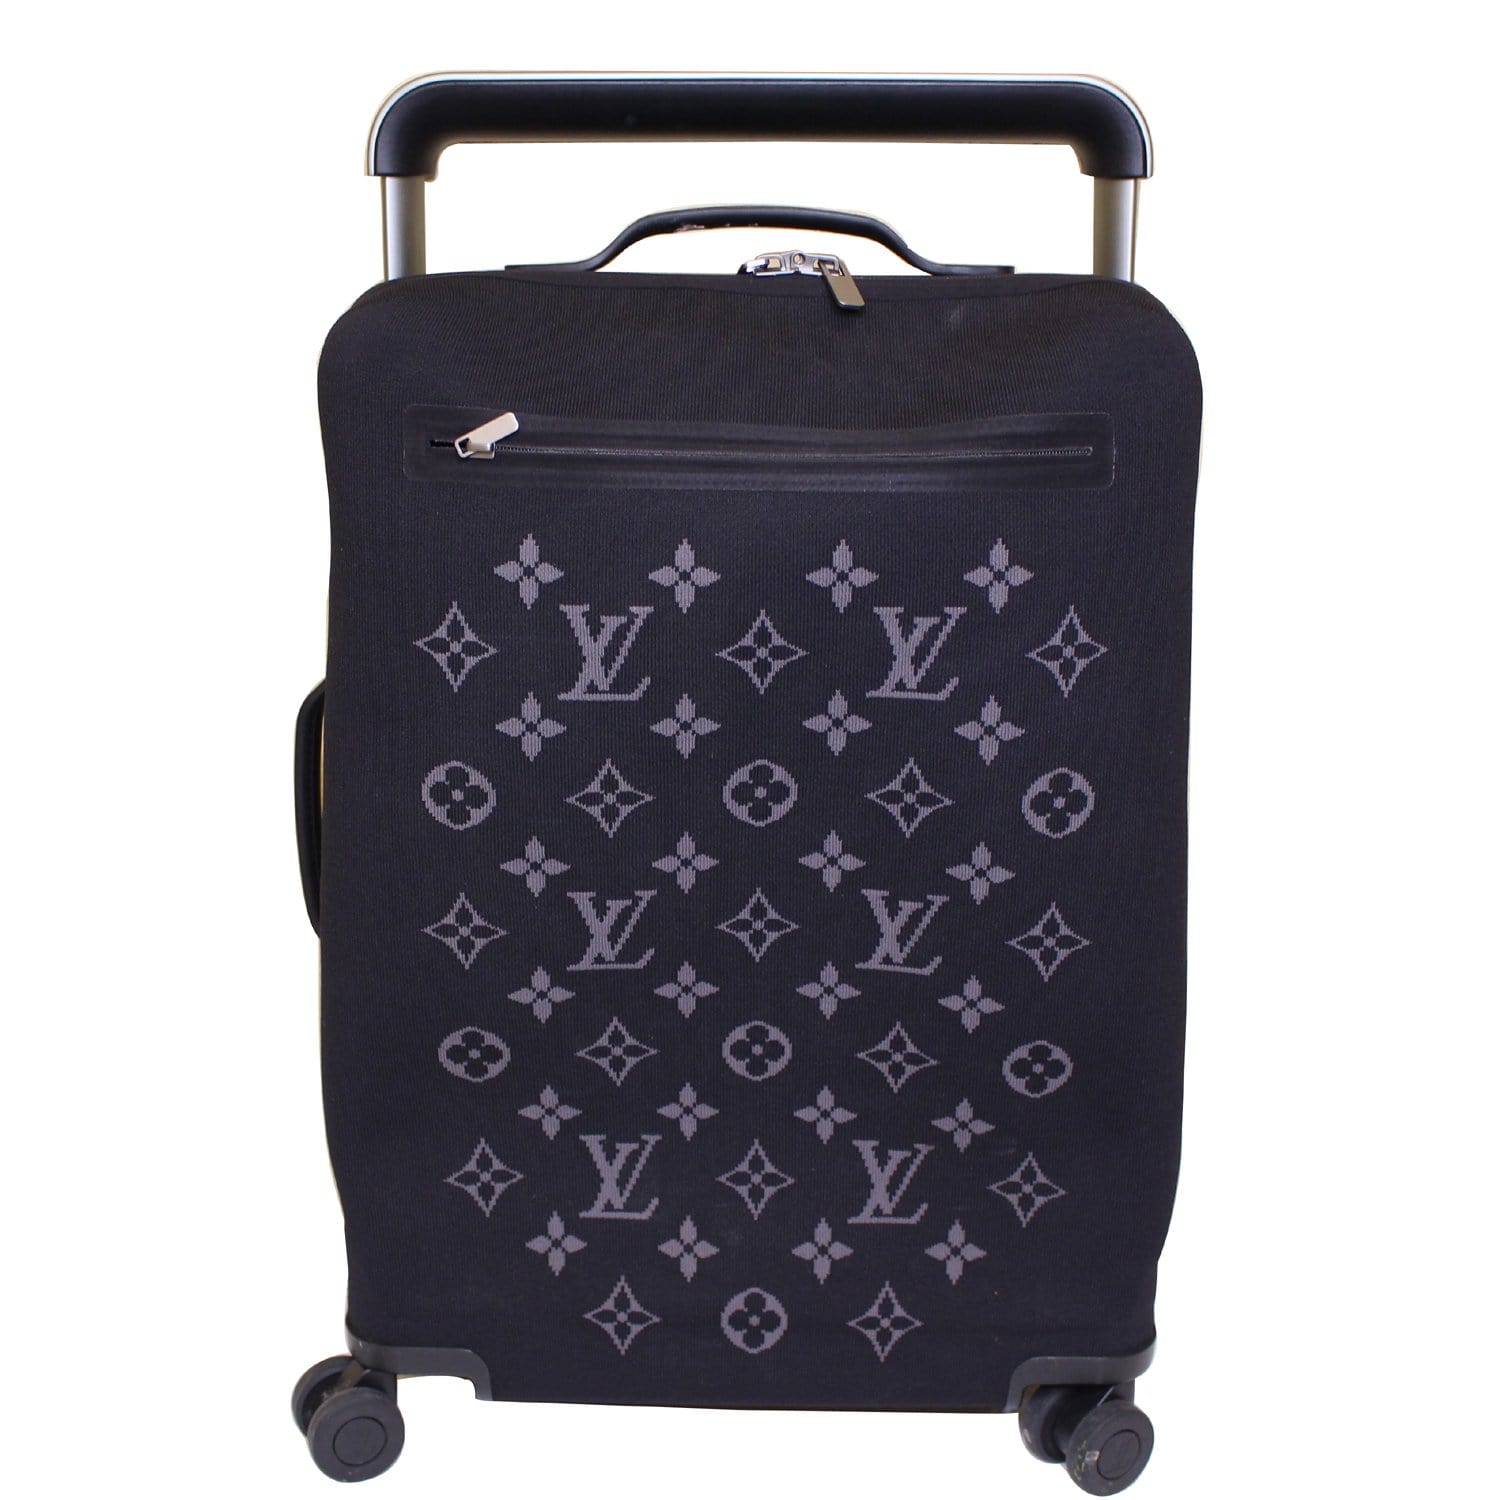 Louis Vuitton unveils all new “Horizon” soft luggage collection